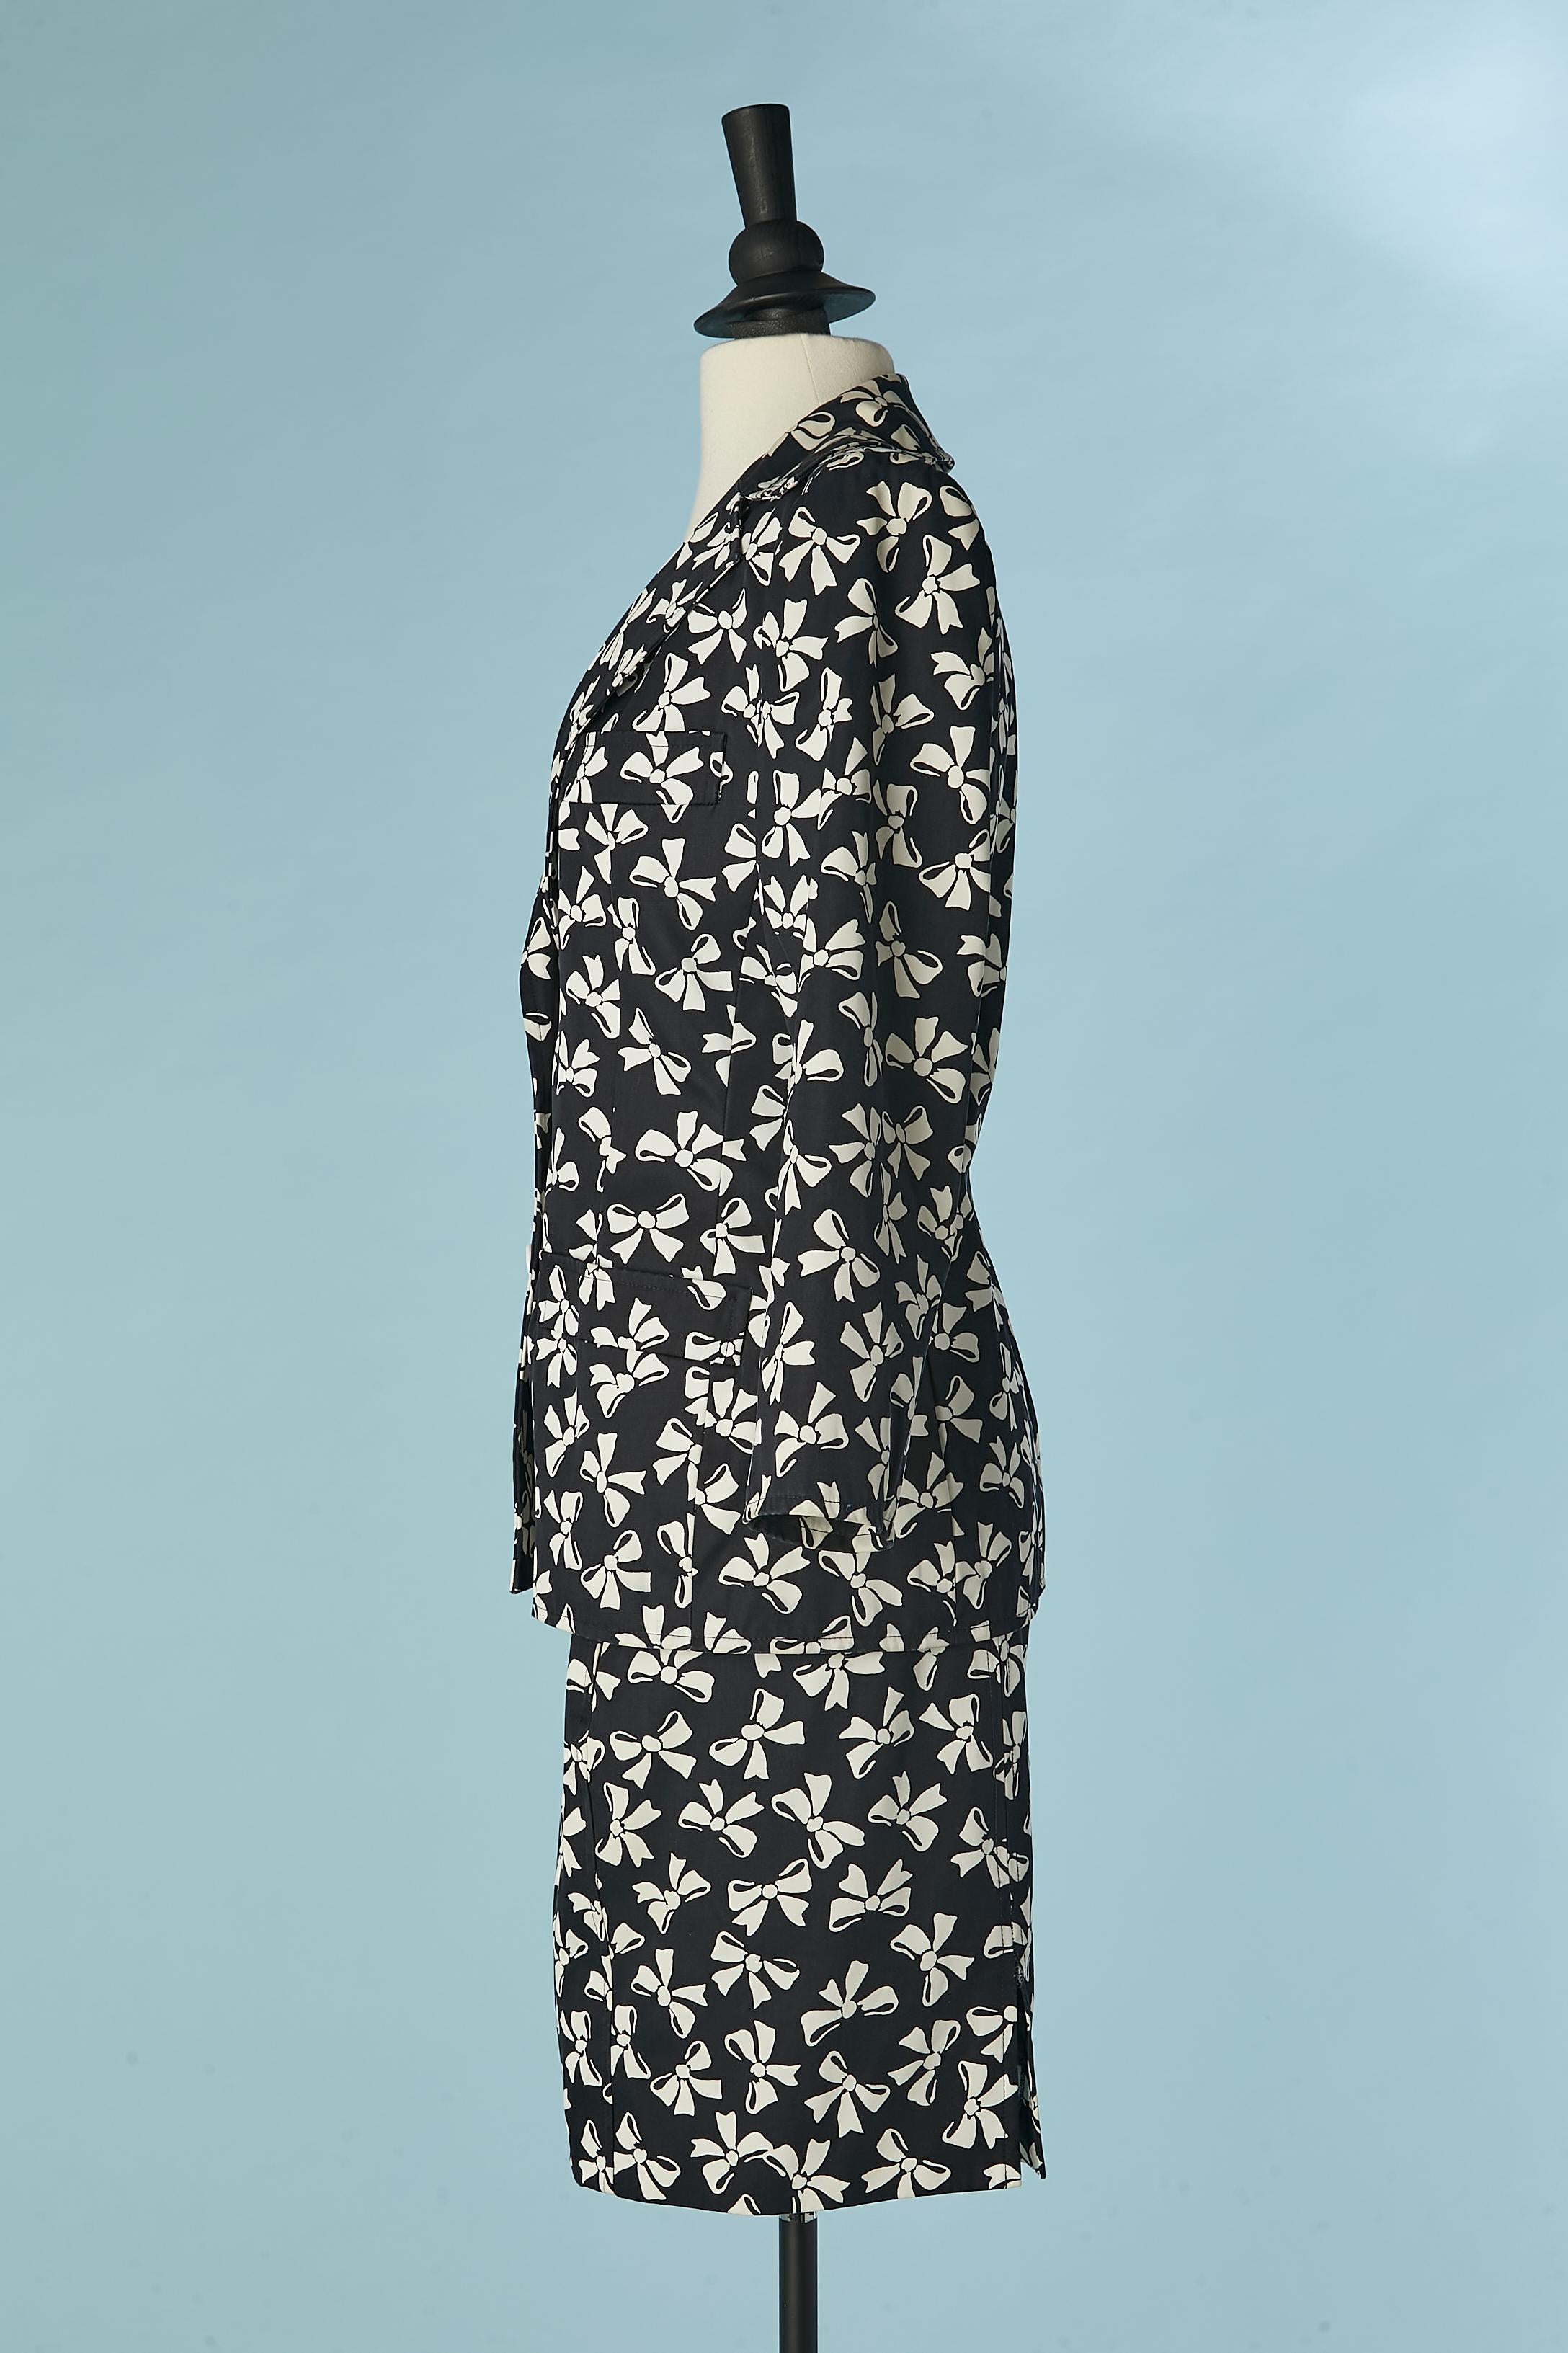 Women's Black and white skirt-suit with bow print Saint Laurent Rive Gauche SS 1987  For Sale